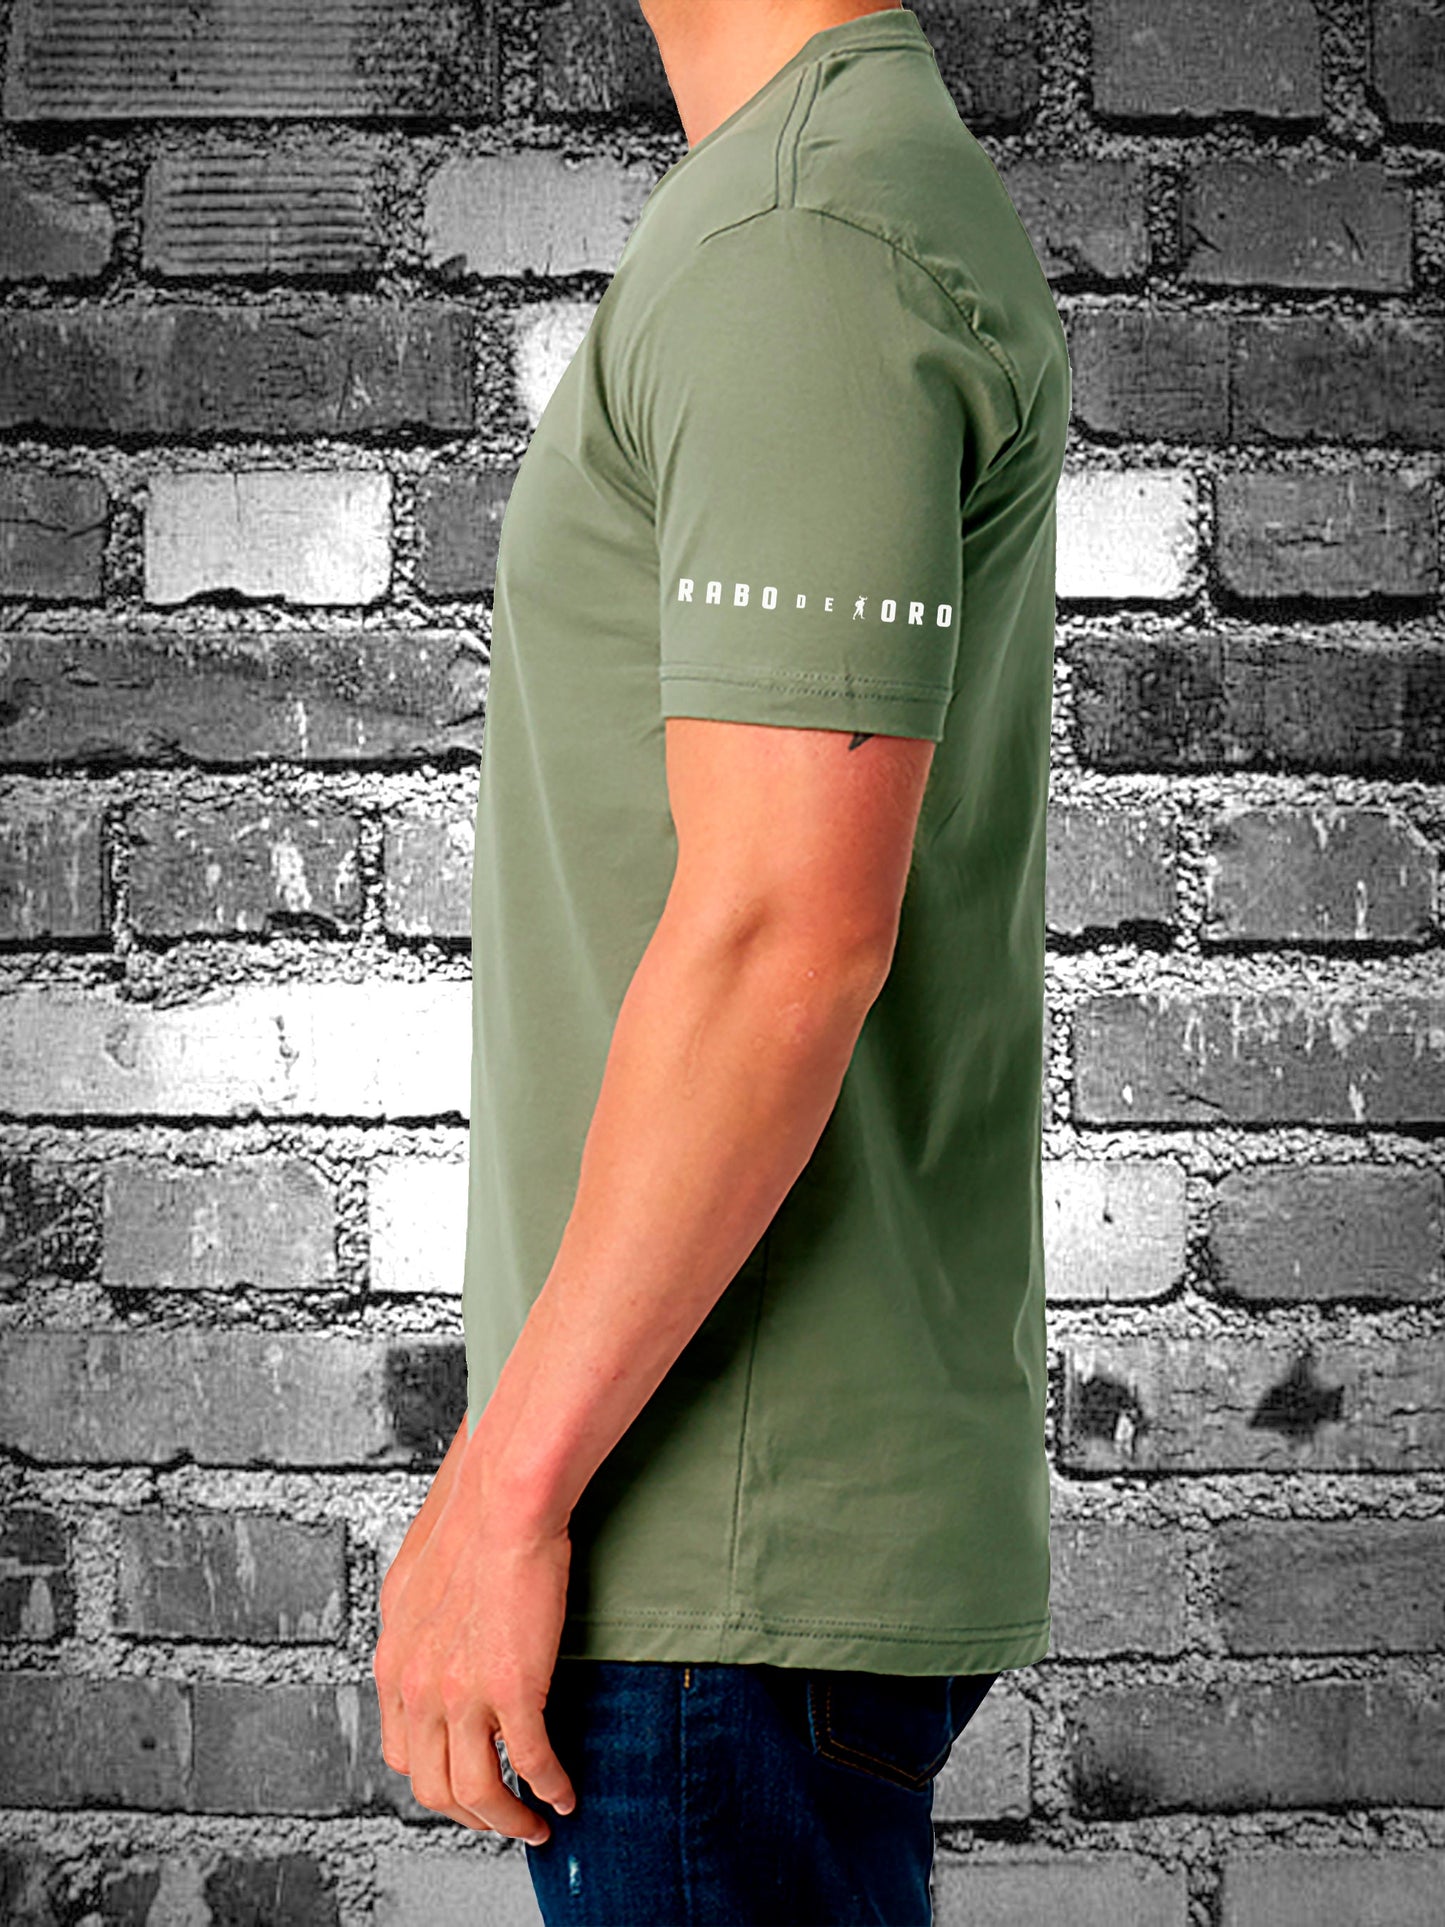 Camiseta OFFICER's CANDY Olive con diseño Piss Urinal